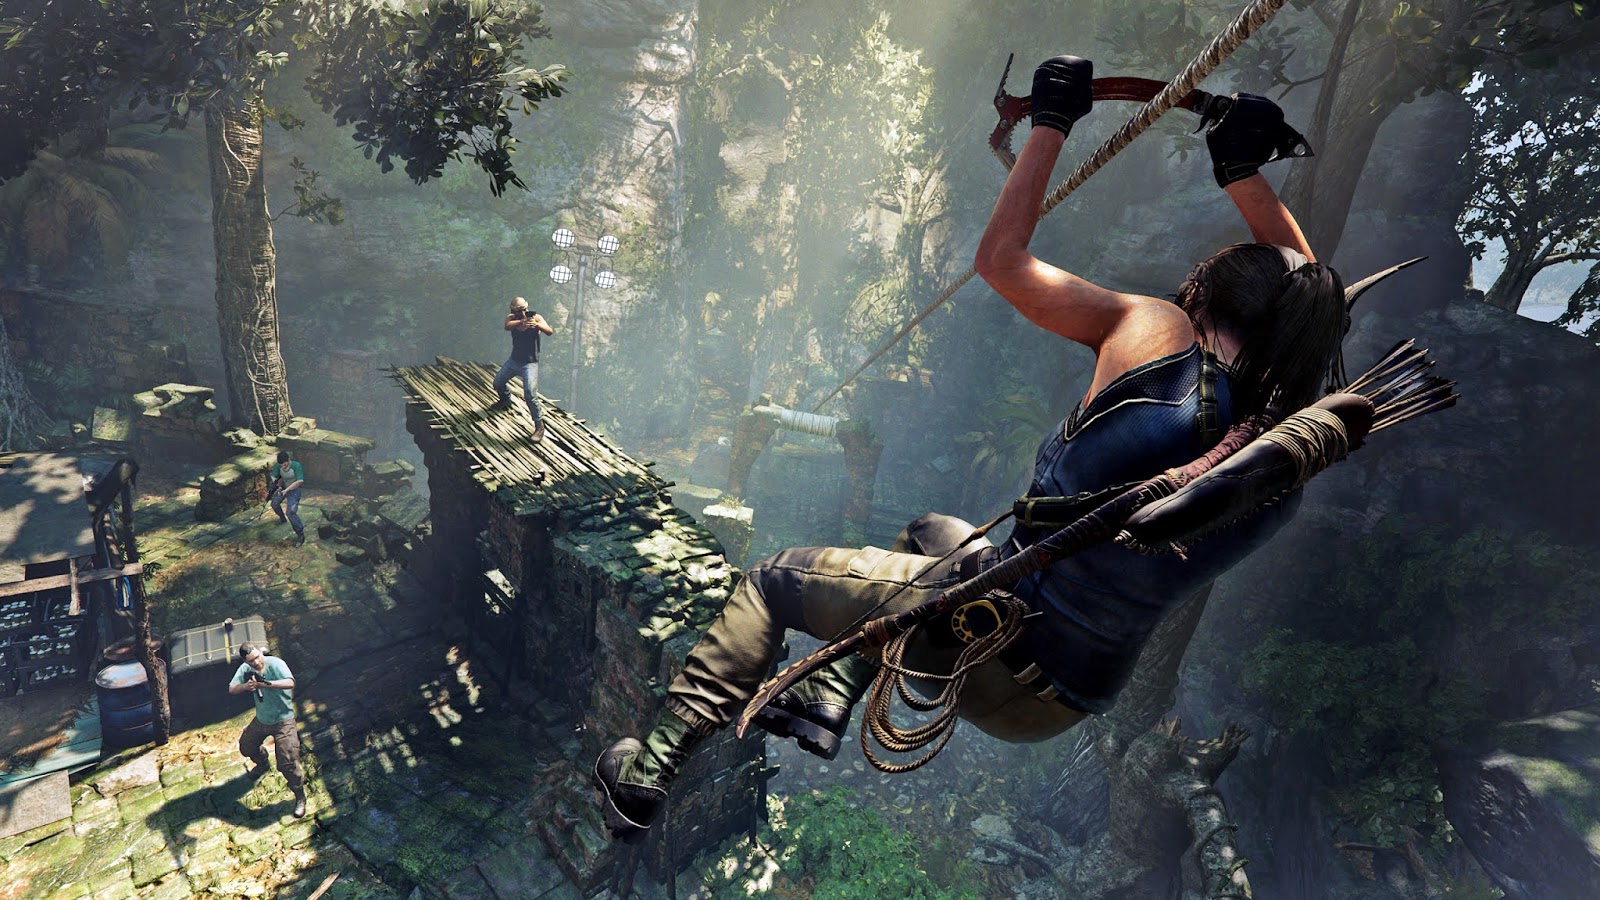 Shadow Of The Tomb Raider PC Game Download Full Version. 